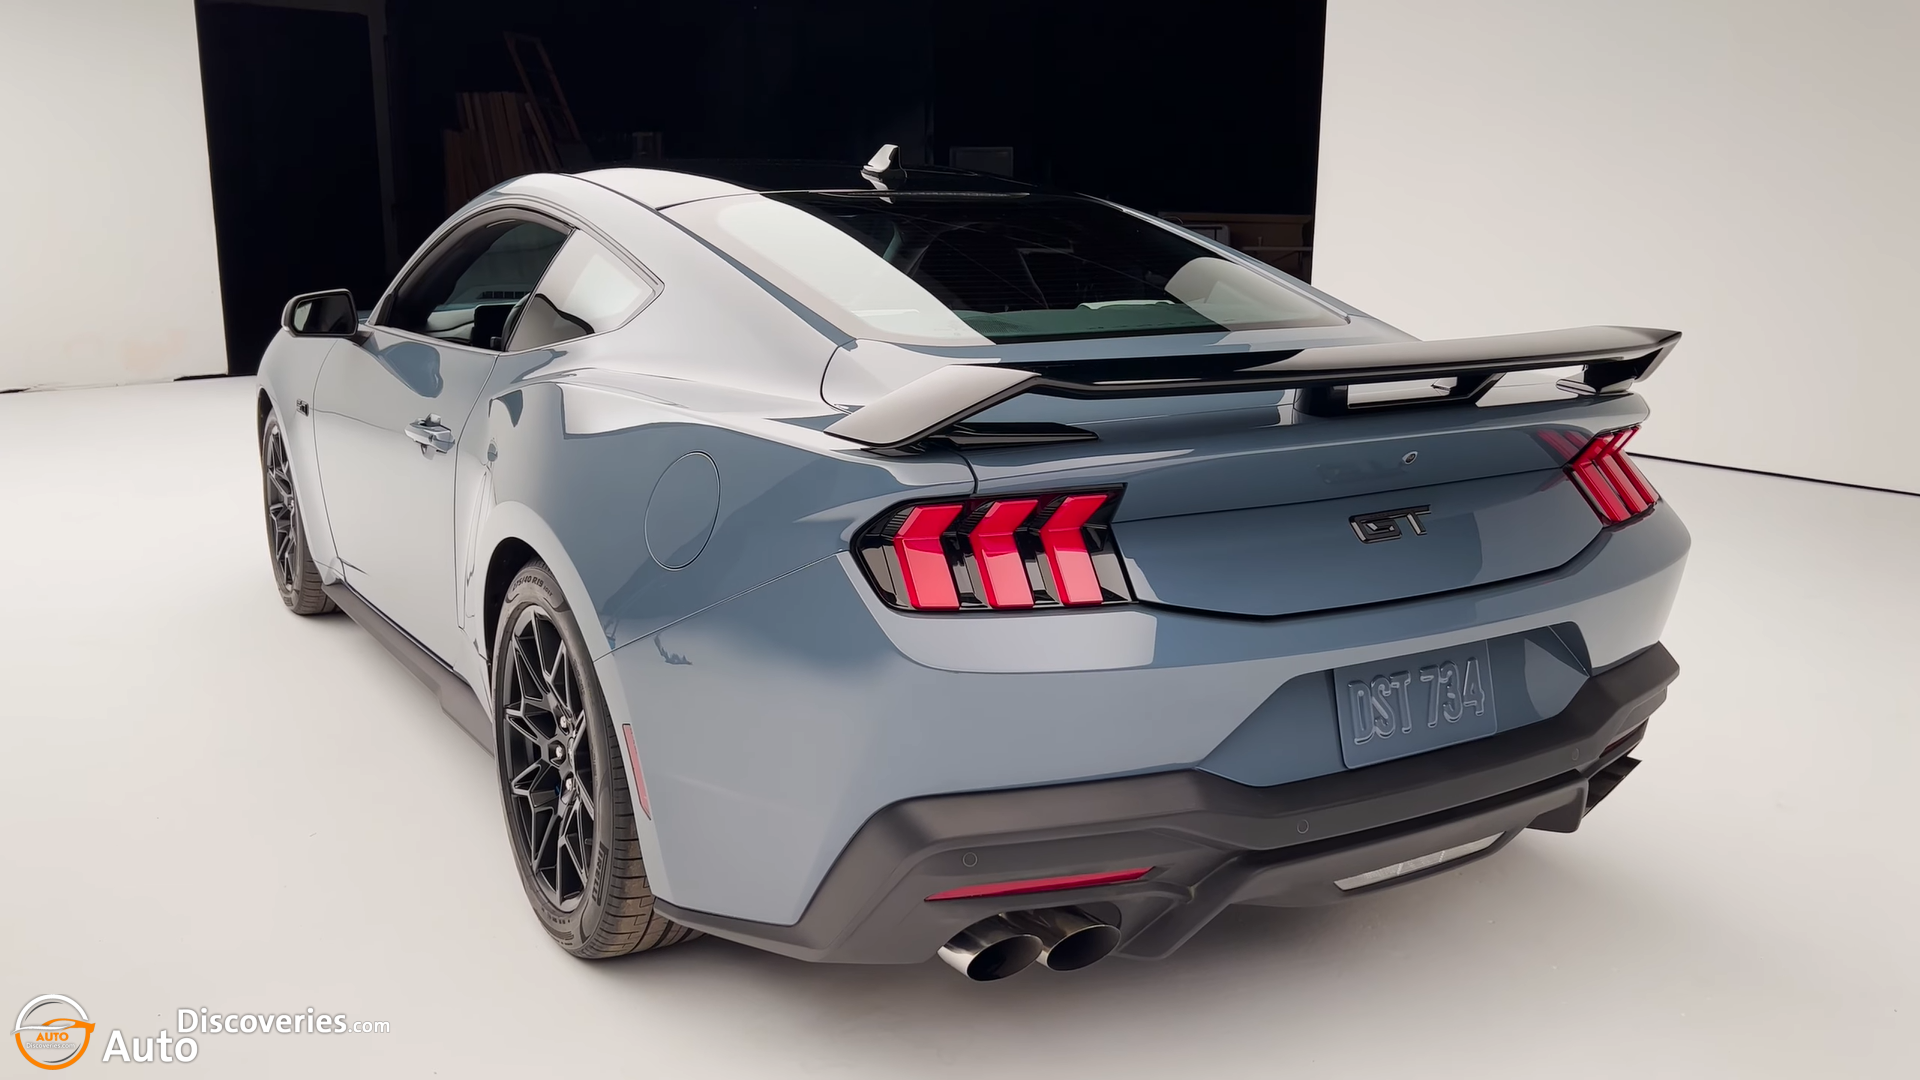 New 2024 Ford Mustang GT Full Tour Of The AllNew Mustang Auto Discoveries